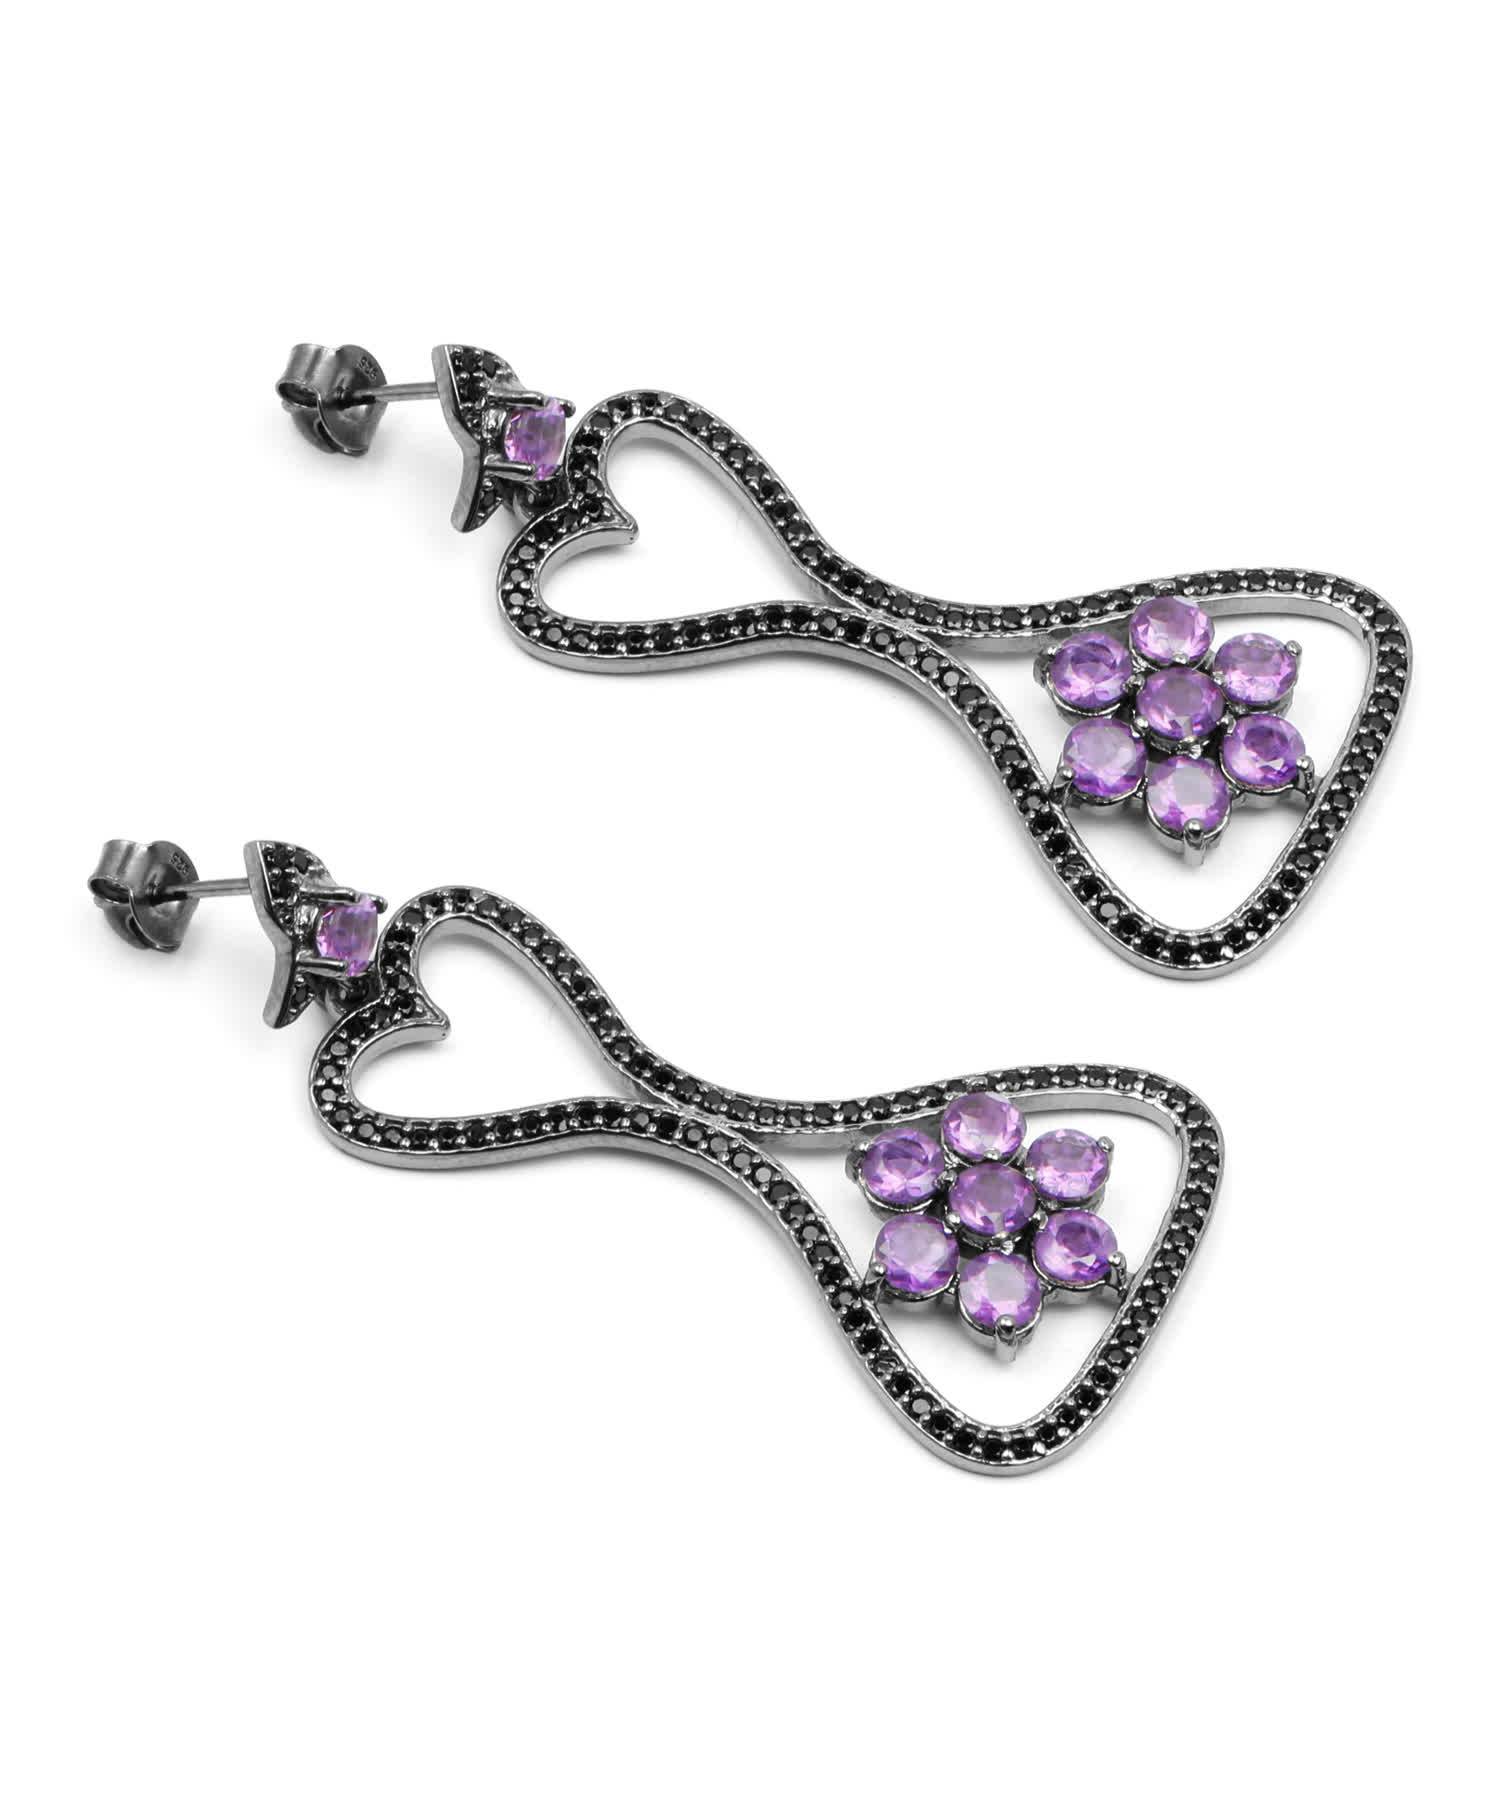 6.30ctw Natural Amethyst and Black Spinel Rhodium Plated 925 Sterling Silver Antique Style Dangle Earrings View 3